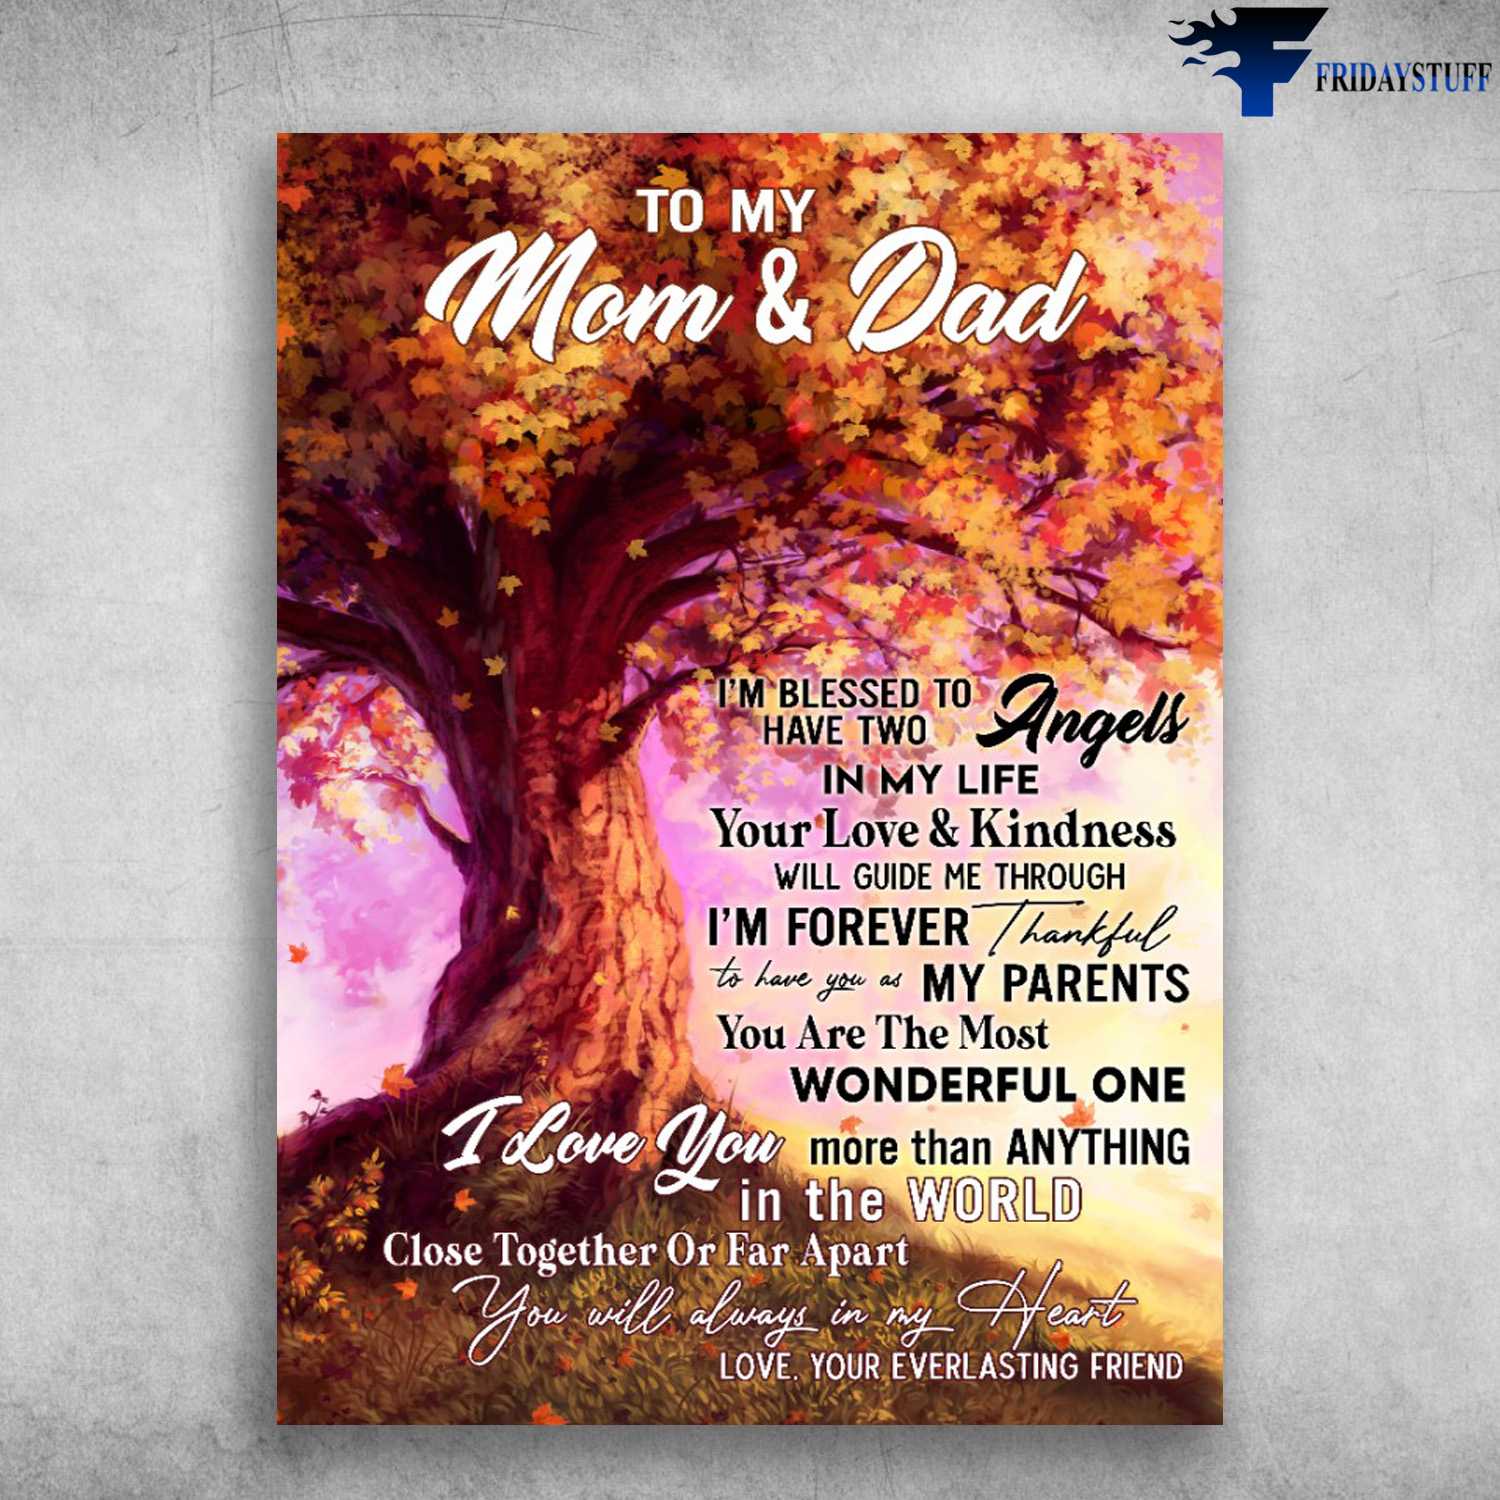 Mom And Dad, To My Mom And Dad, I'm Blessed To Have Two Angels, In My Life, Your Love And Kindness, Will Guide Me Through, I'm Forever Thankful